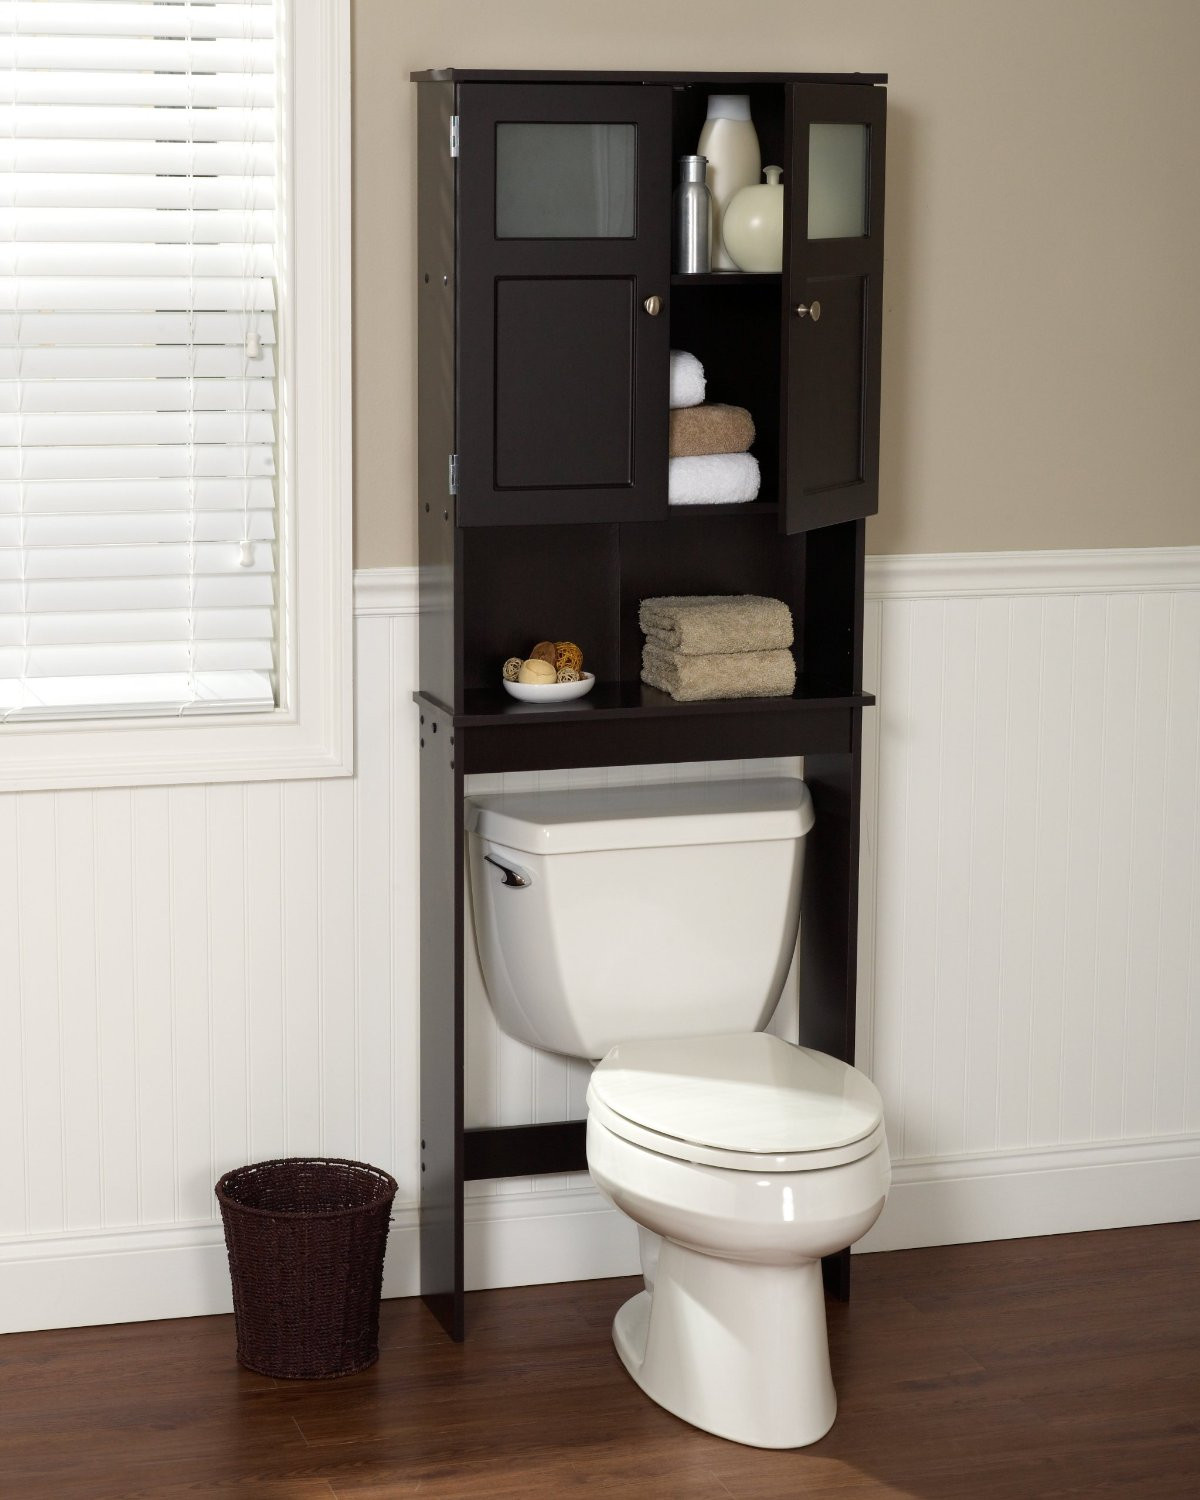 Bathroom Cabinets Over The Toilet
 10 Best Over Toilet Storage Units Reviewed & Buying Guide